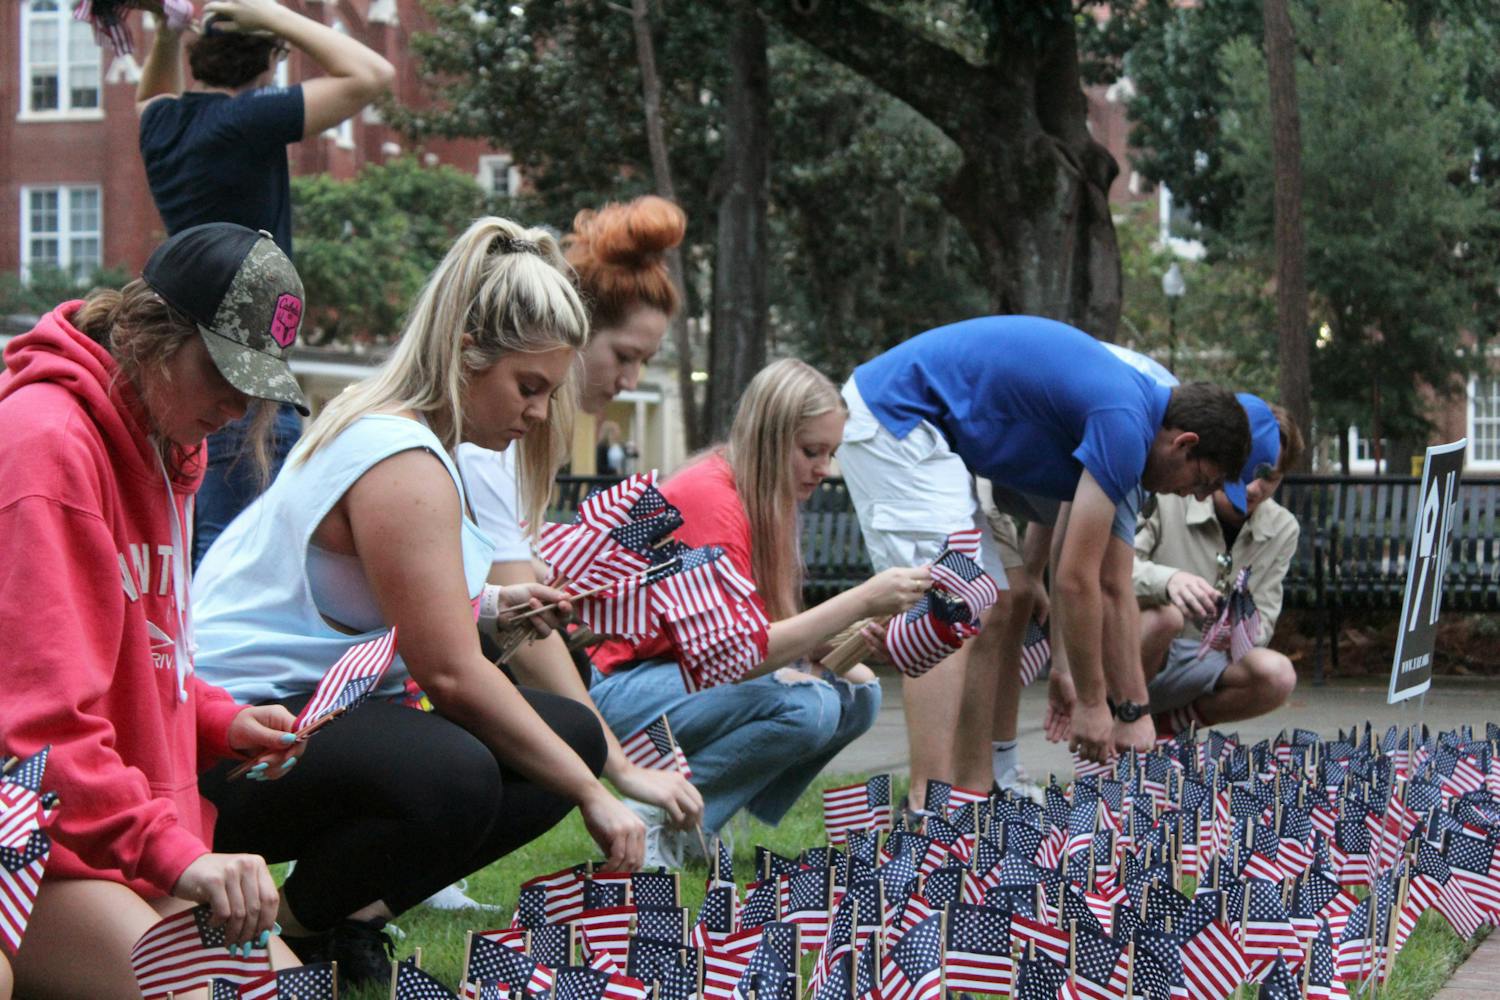 On Saturday, Sept. 11, 2021, city residents and university members across Gainesville commemorated what happened on 9/11, 20 years ago. UF Young Americans for Freedom planted 2,977 flags in the ground to represent the lives lost. About 50 people gathered at Reserve Park to share stories about how 9/11 impacted them. Collegiate Veterans Society members, firefighters and friends met at Ben Hill Griffin Stadium to climb the steps to honor those who climbed the tower stairs and saved thousands of lives.&nbsp;